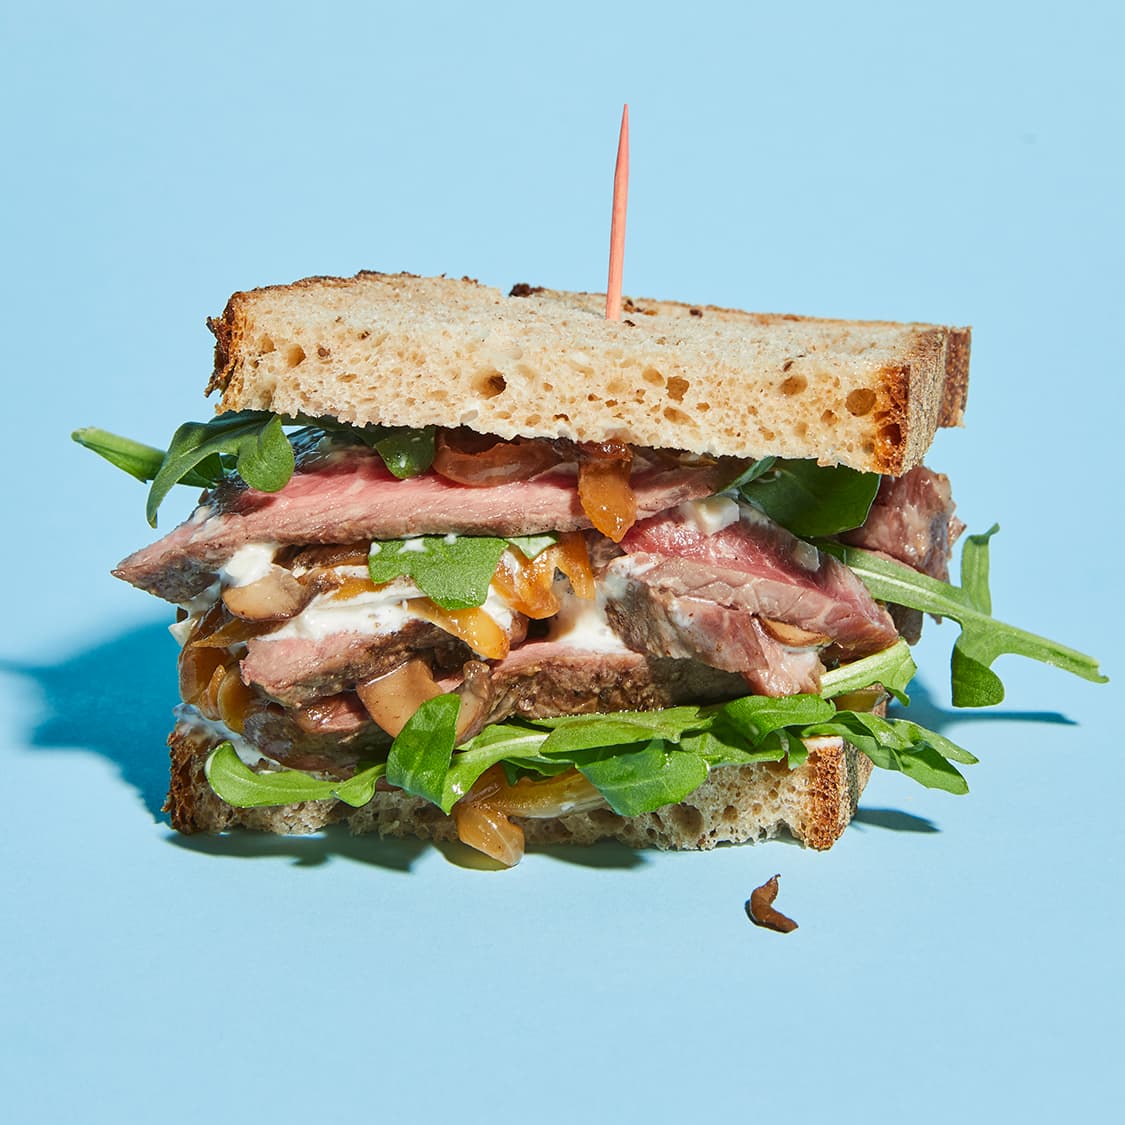 https://fleishigs.com/images/mobile-app/recipes/762-list-grilled-oyster-steak-sandwiches-with-caramelized-mushrooms-and-onions.jpg